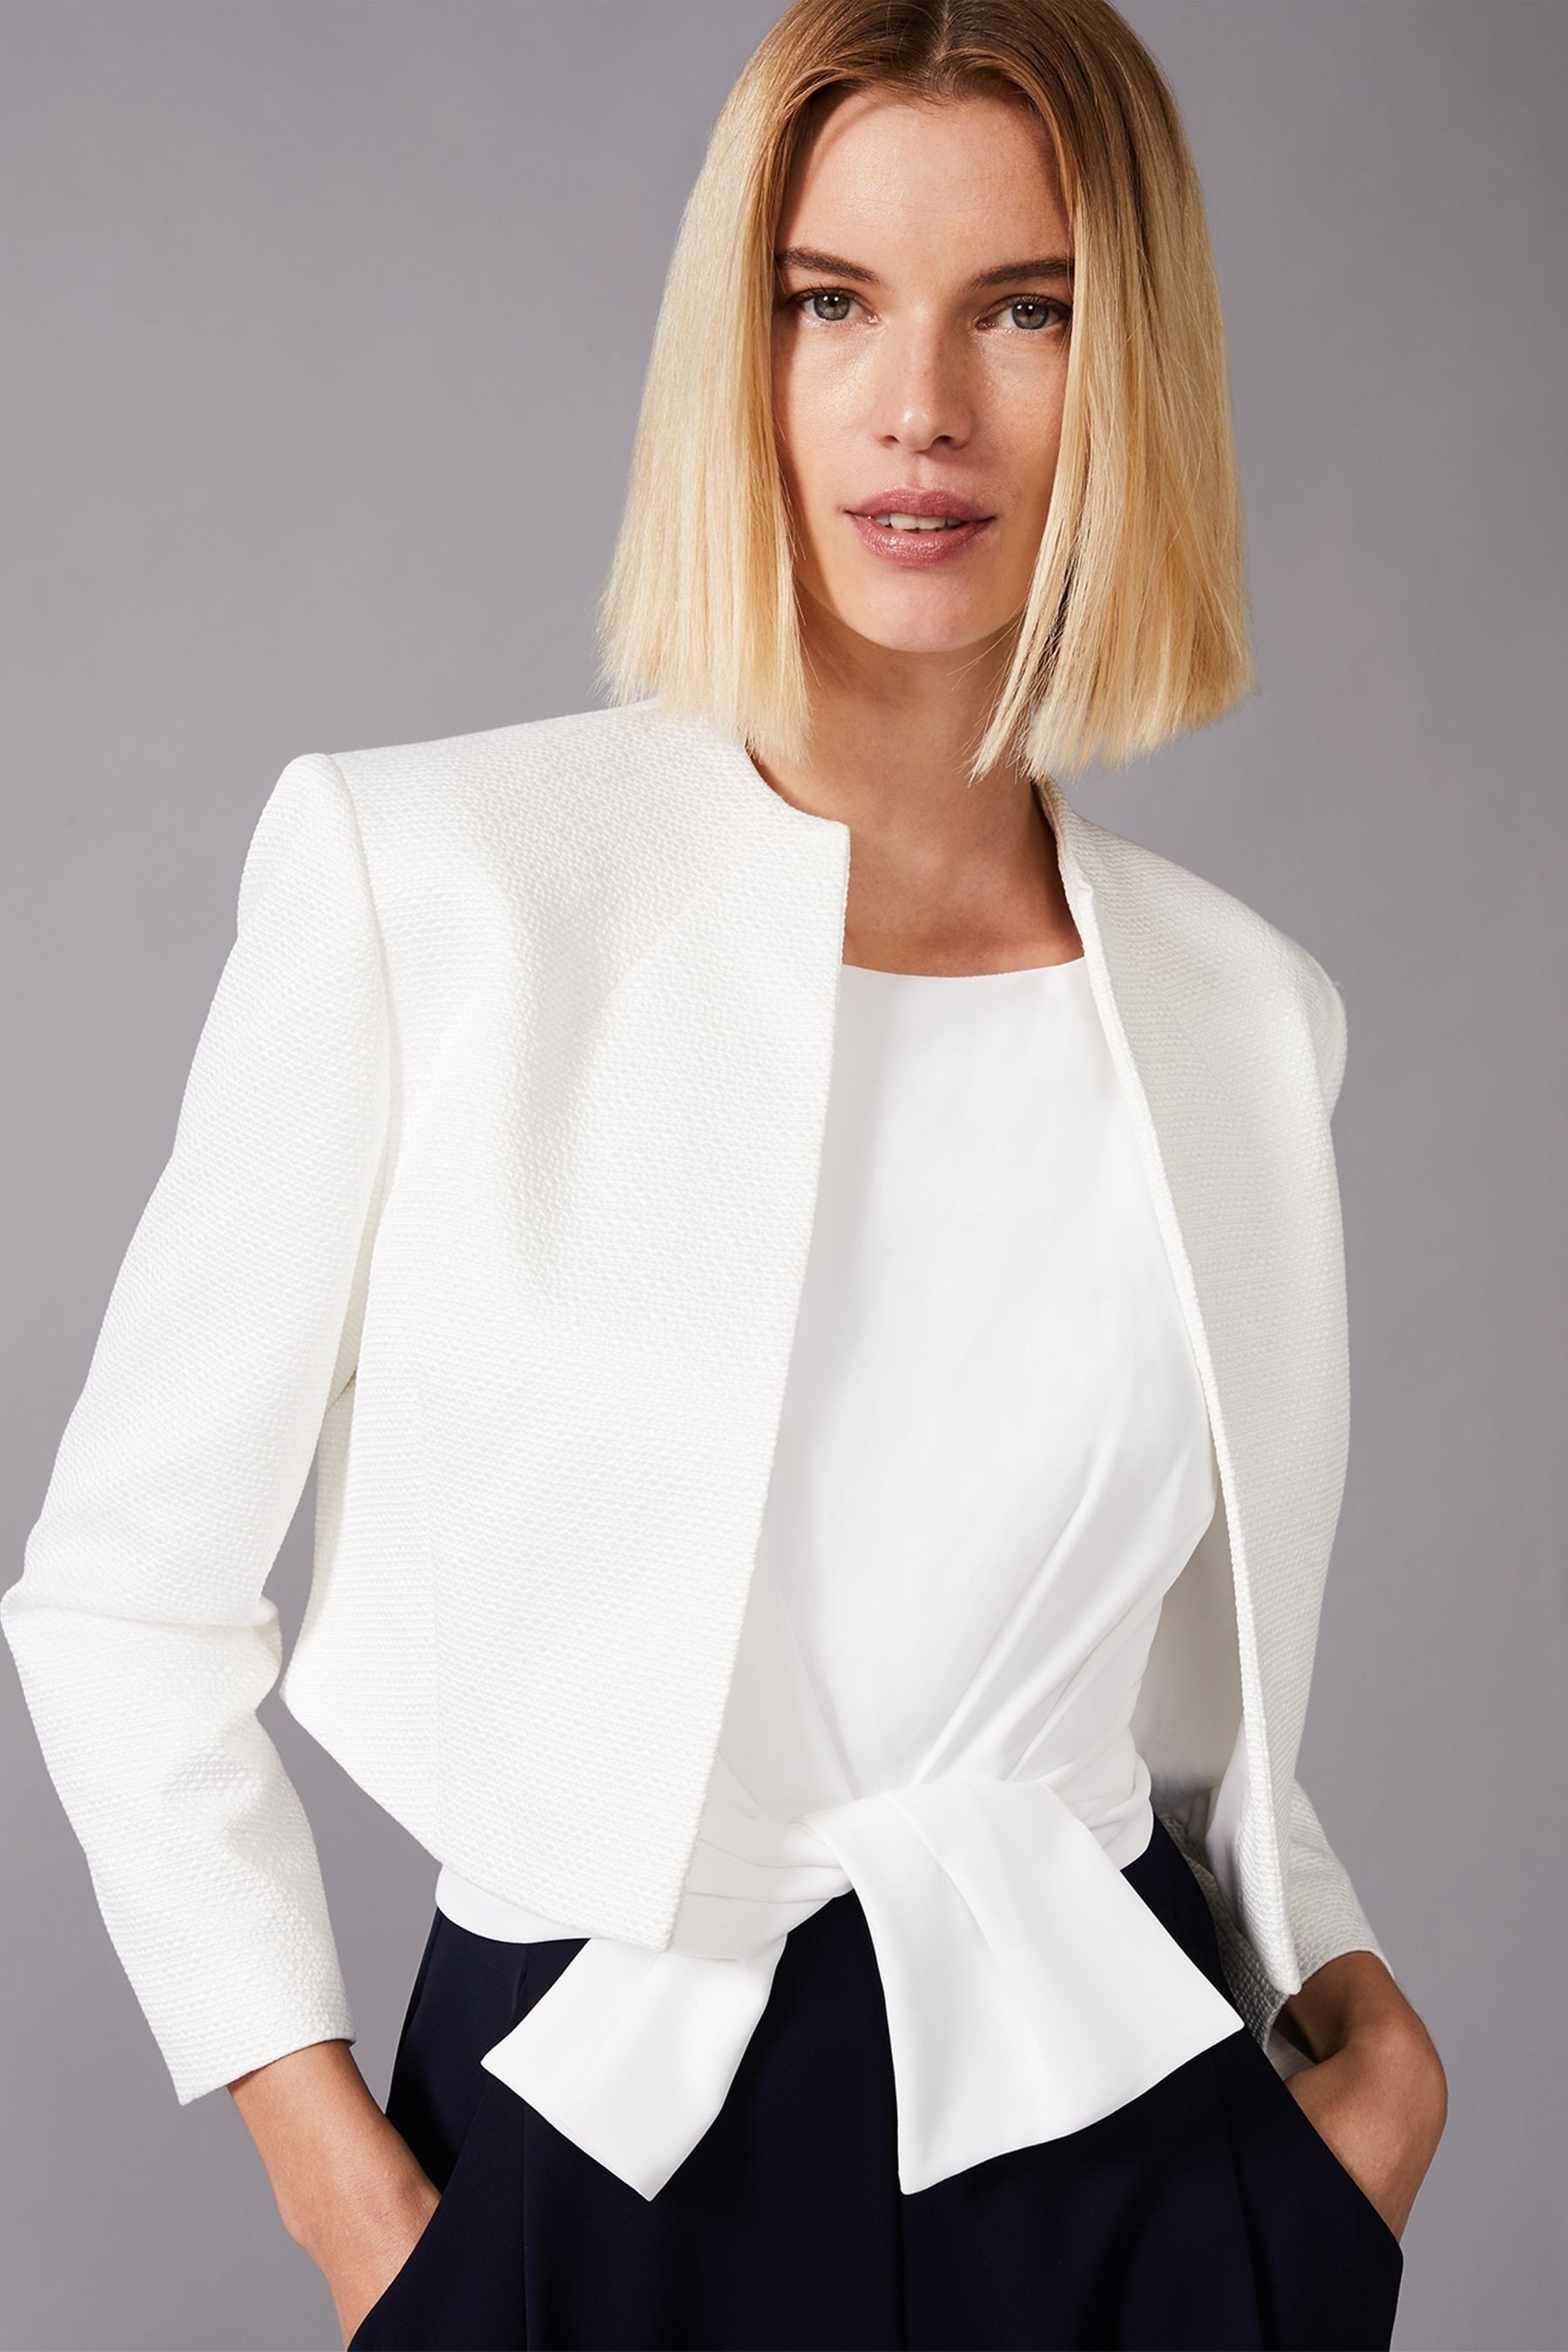 Buy Phase Eight Cream Karlee Textured Jacket from the Next UK online shop